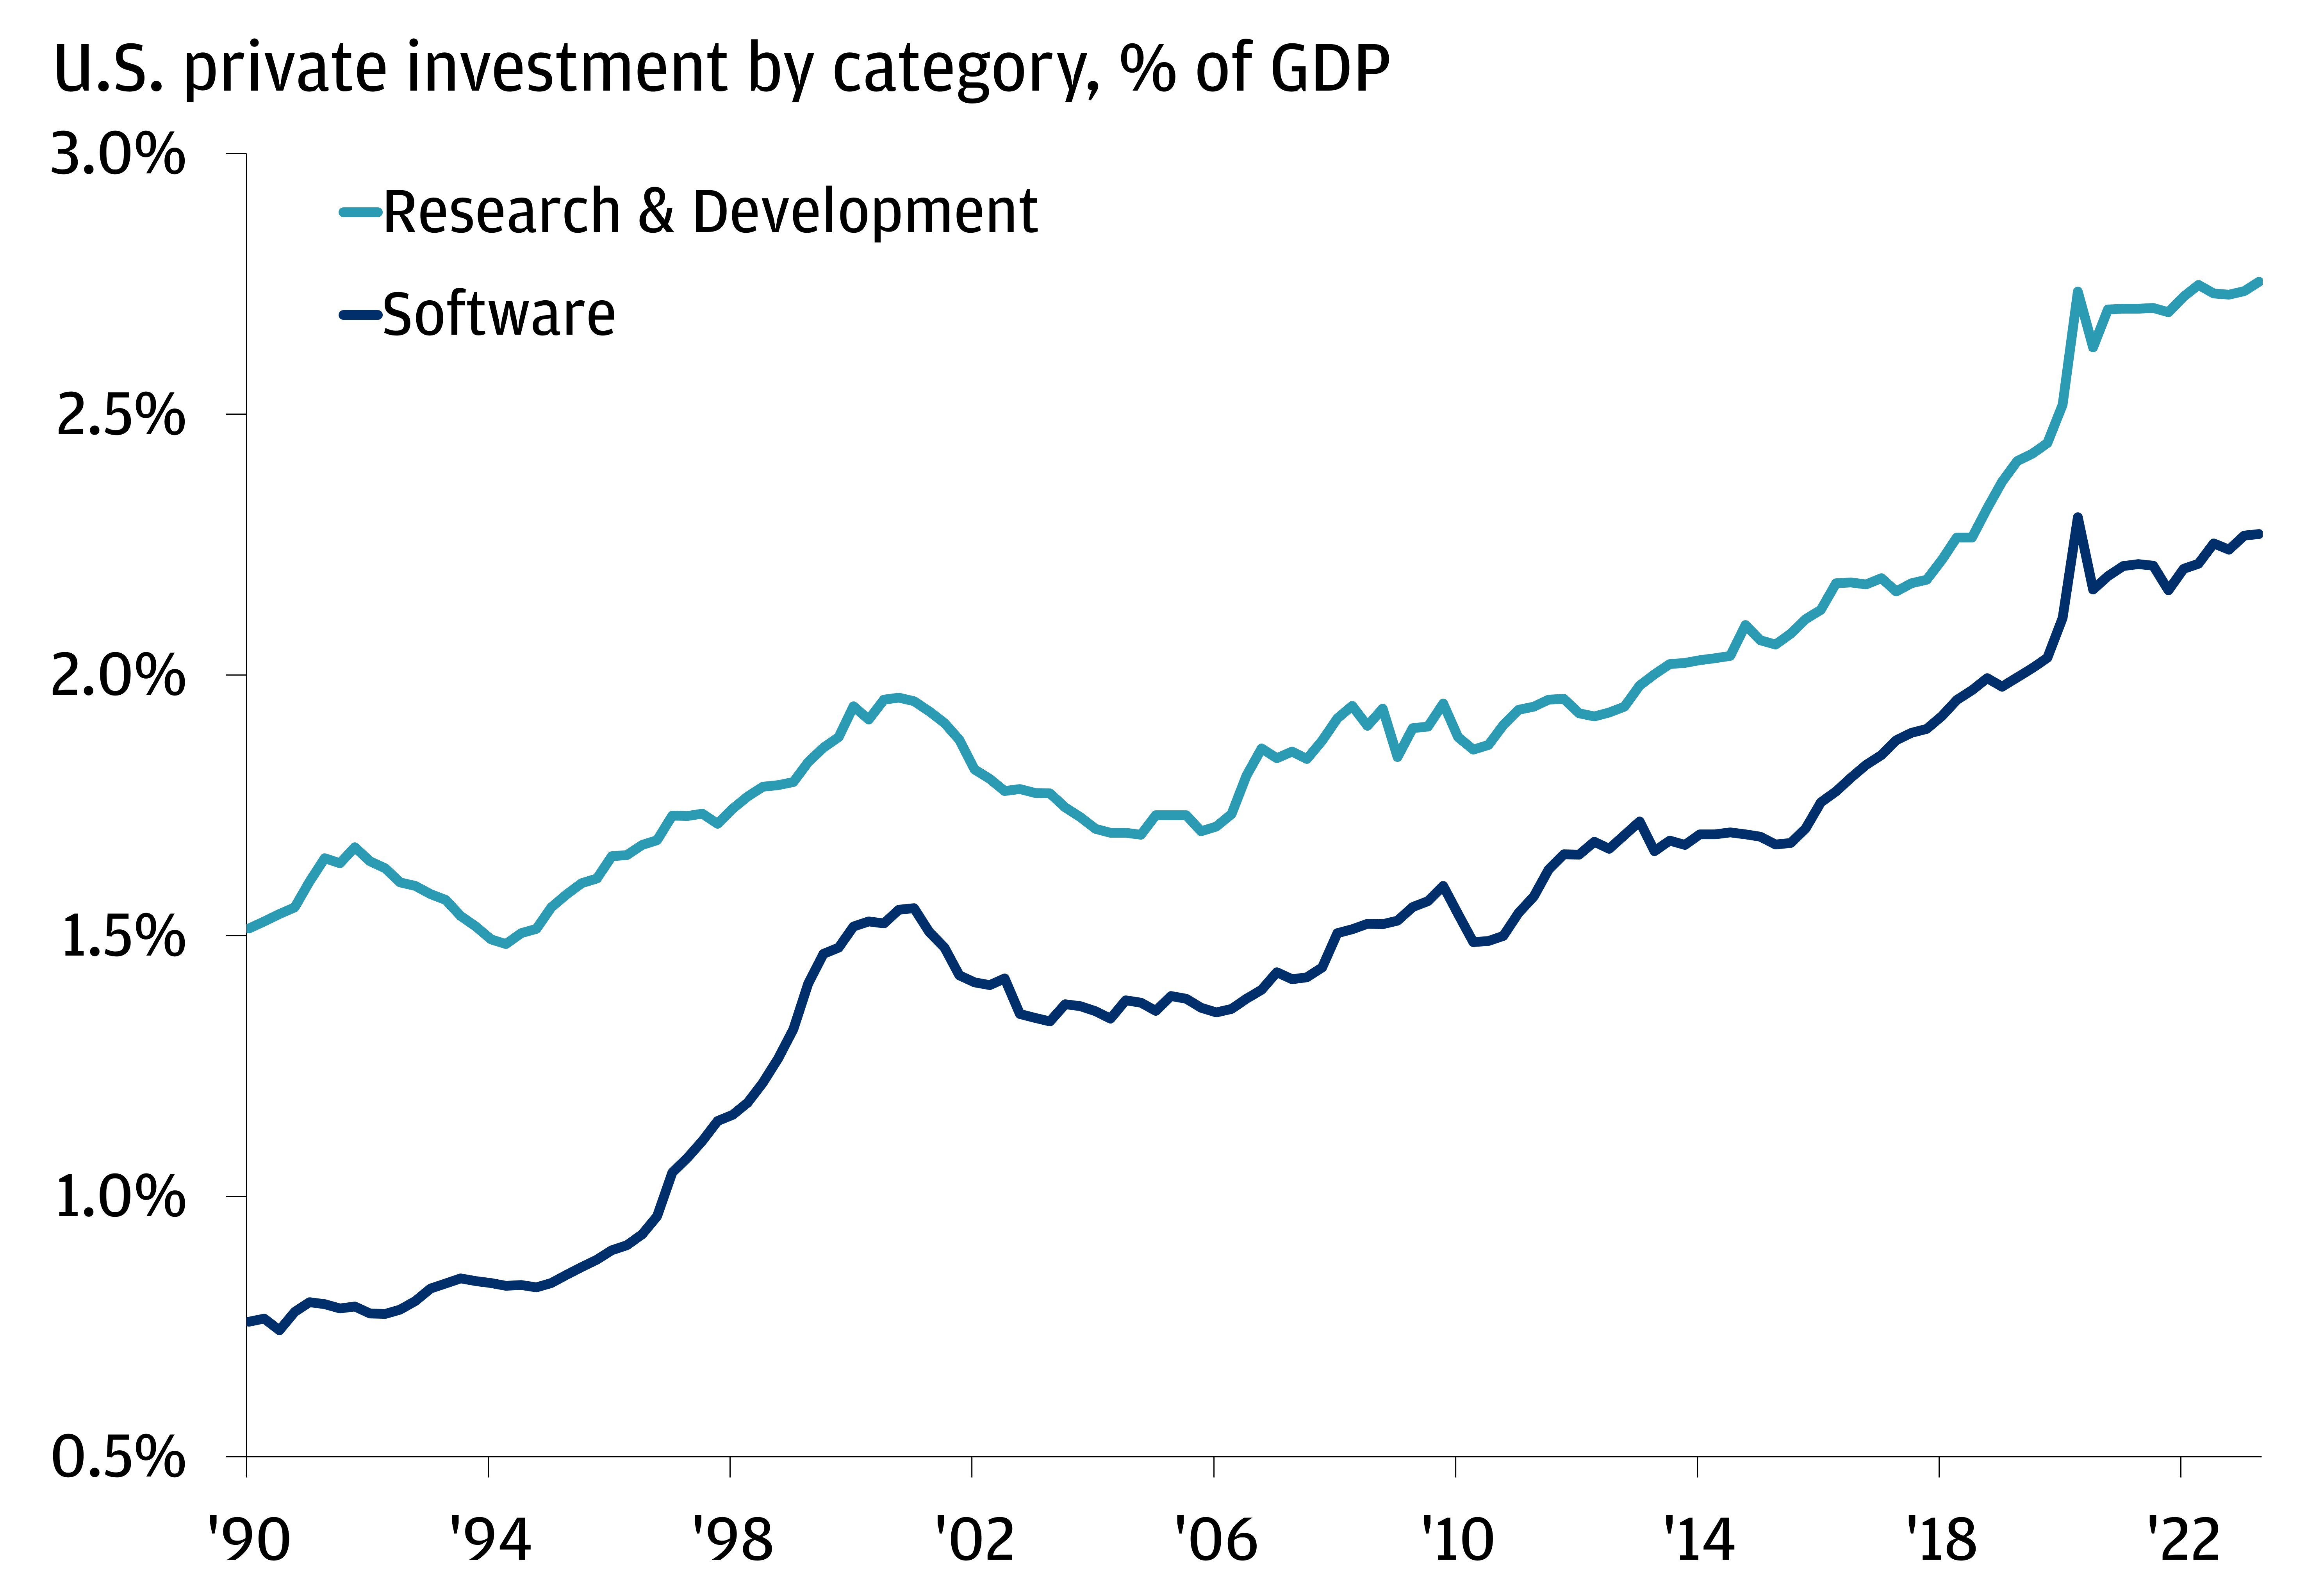 The chart describes U.S. private investment by category as a % of GDP.